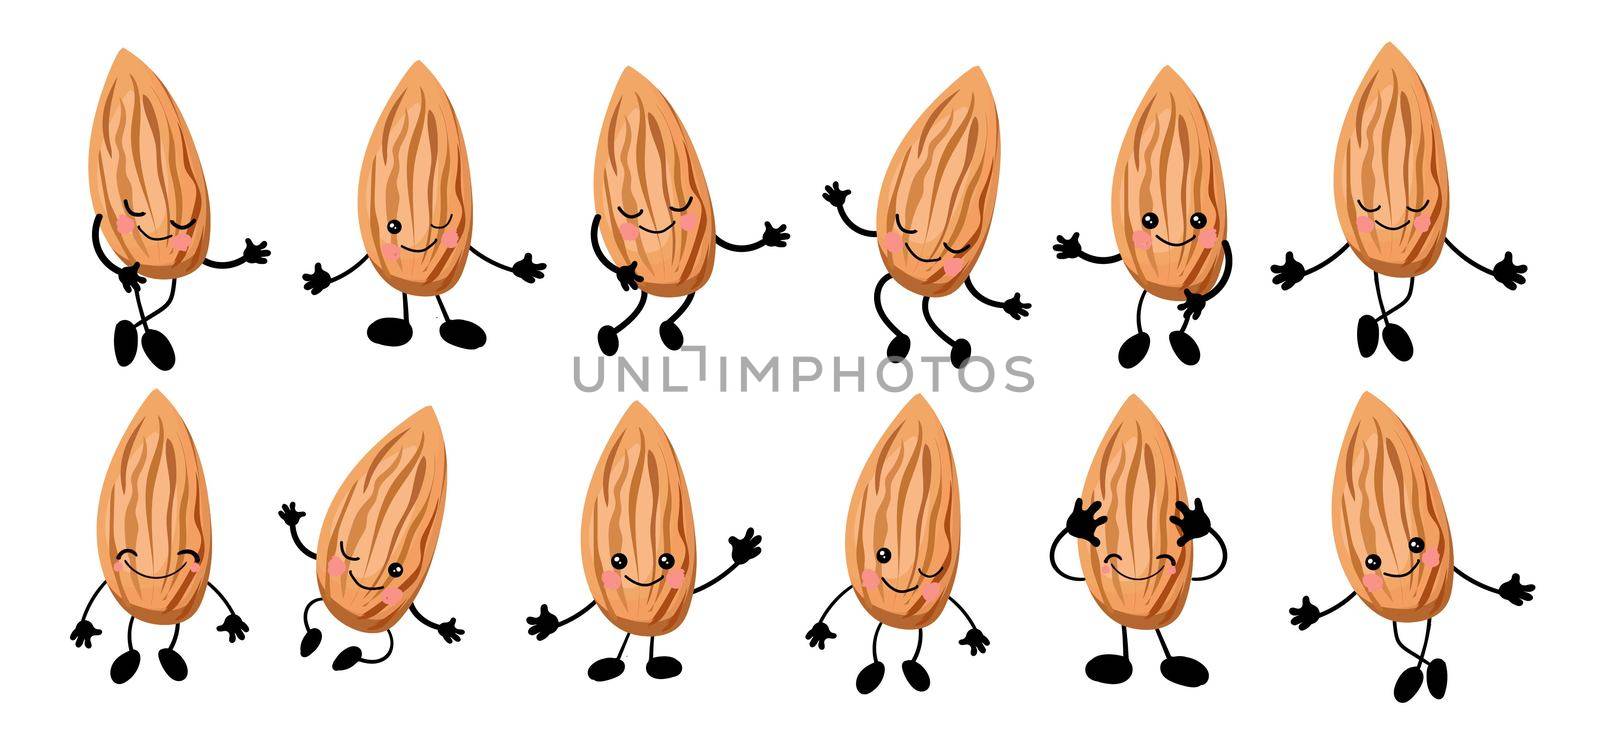 Cute cartoon almond. Walnut character. illustration isolated on white background.